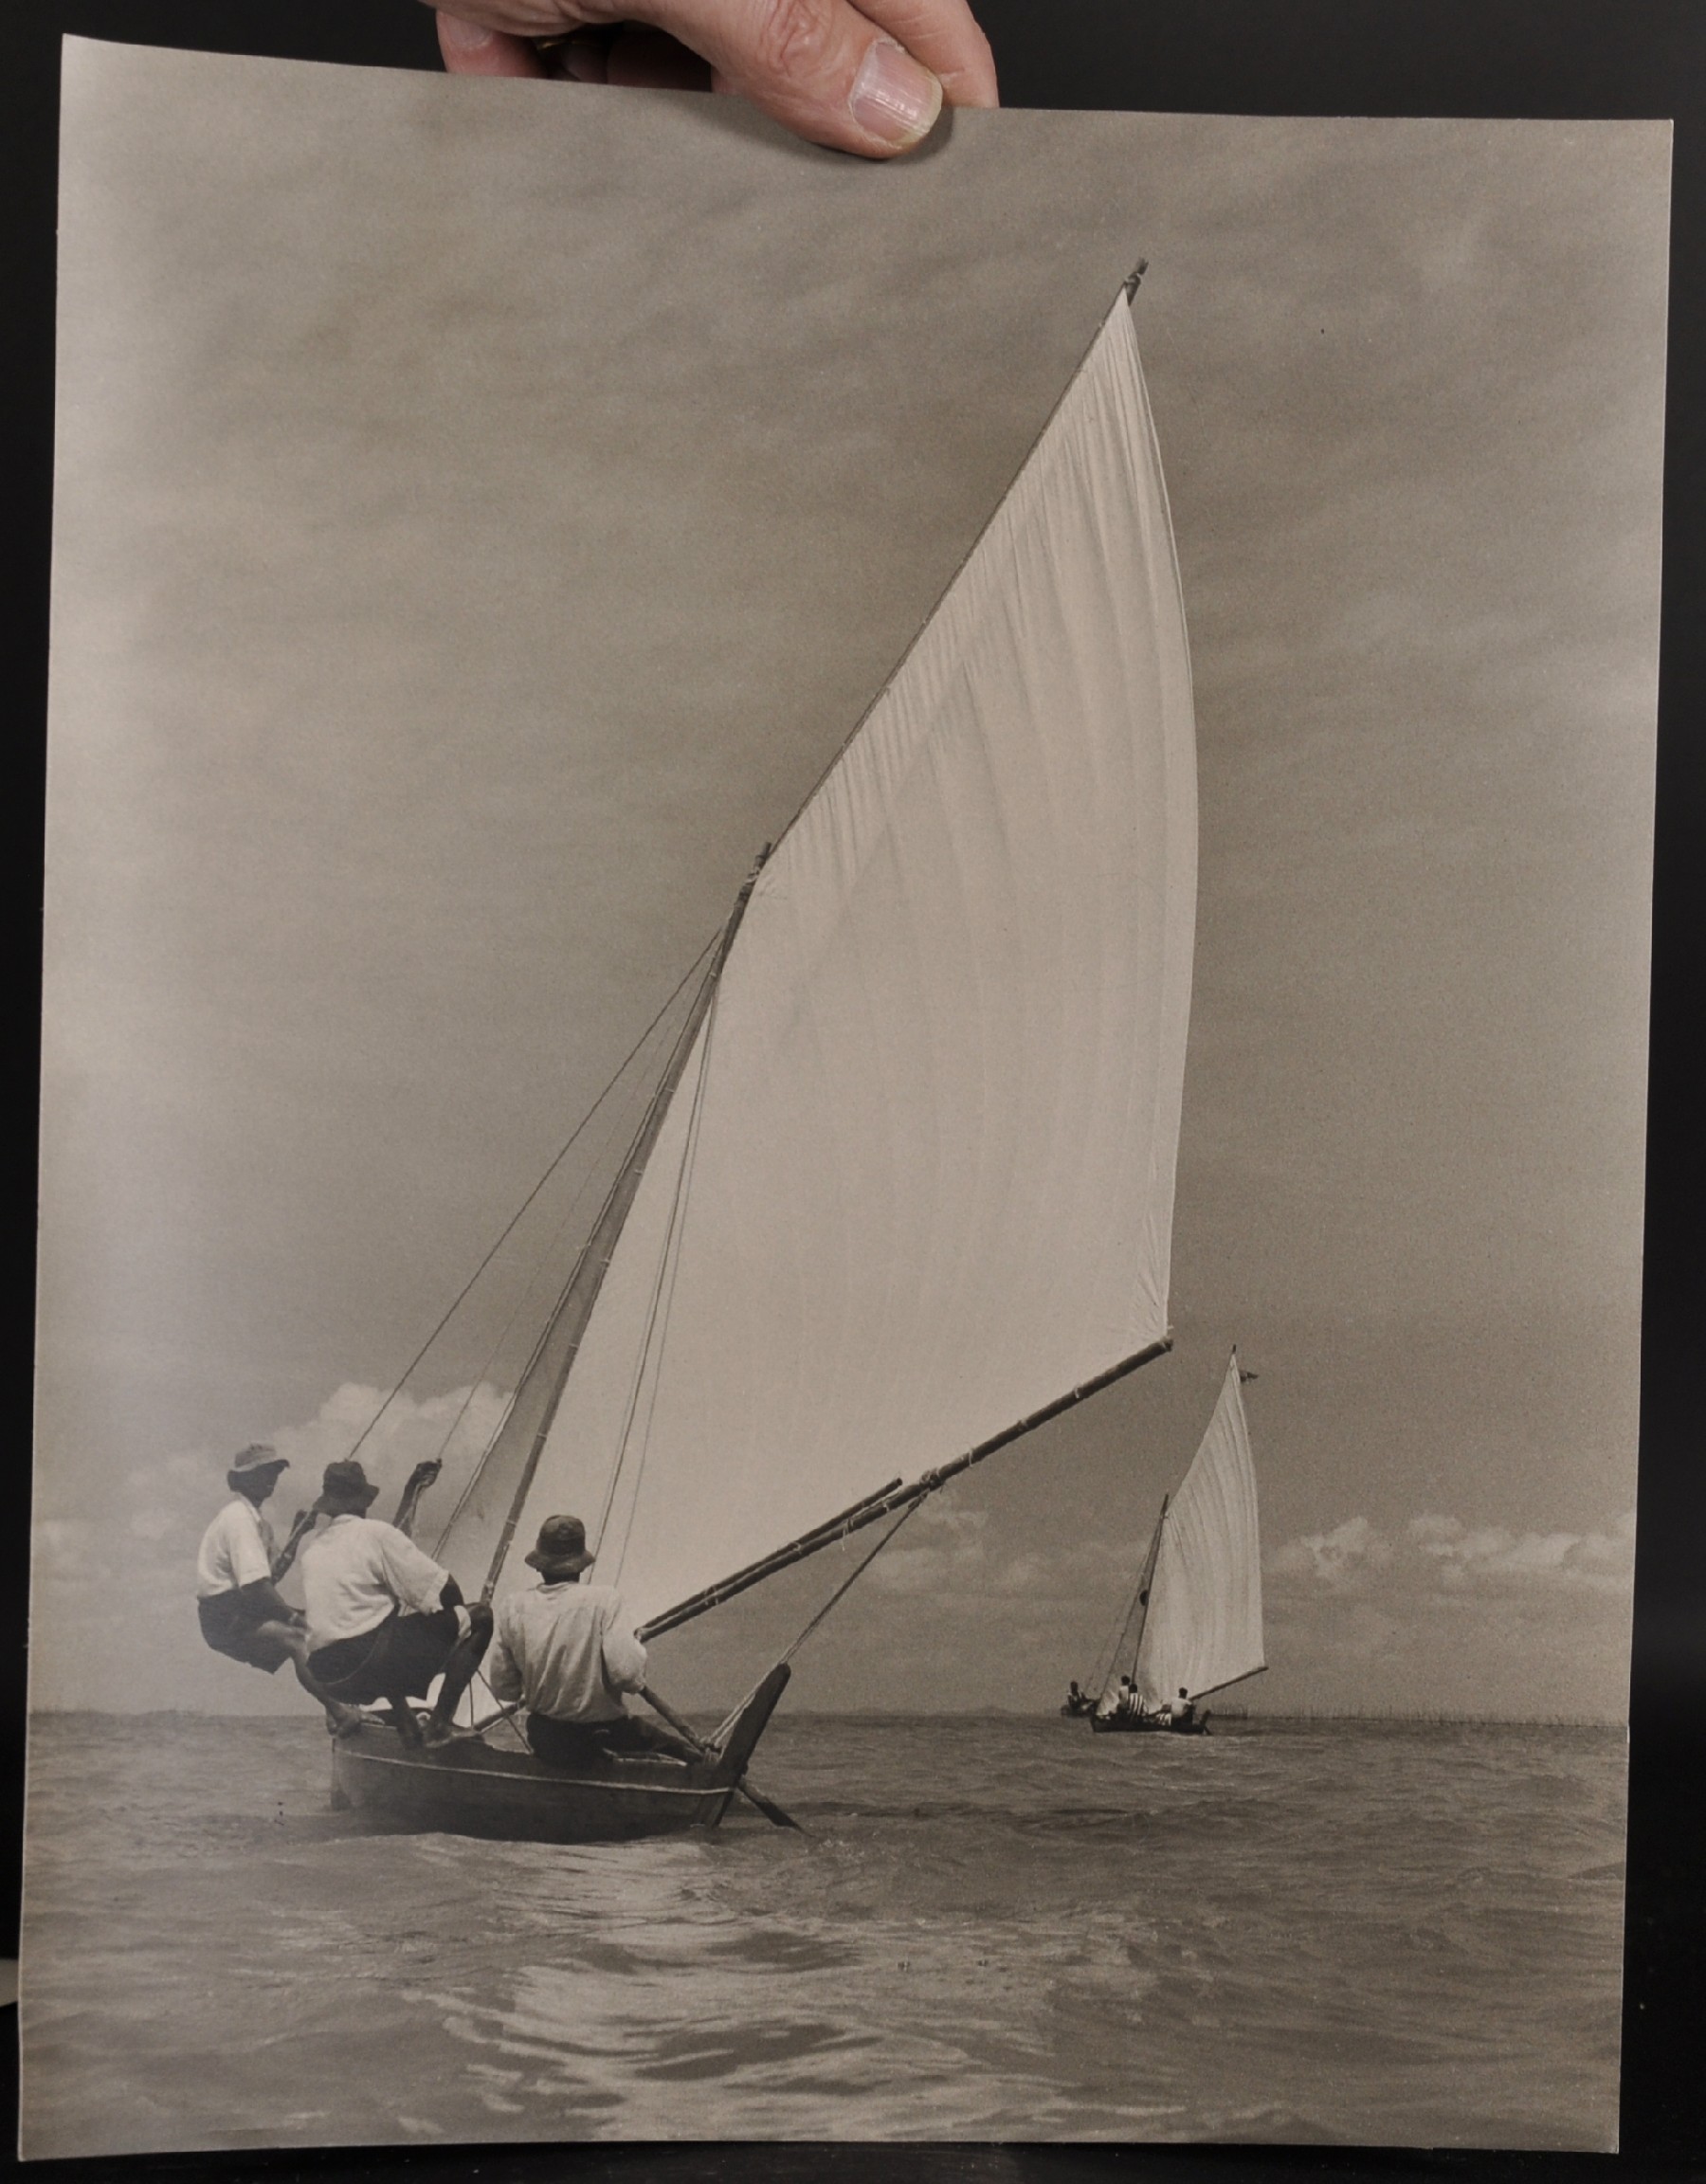 Kwan Chee Yew (20th Century) Malaysian. "At Play", Photograph, Inscribed on the reverse, Unframed, - Image 4 of 9